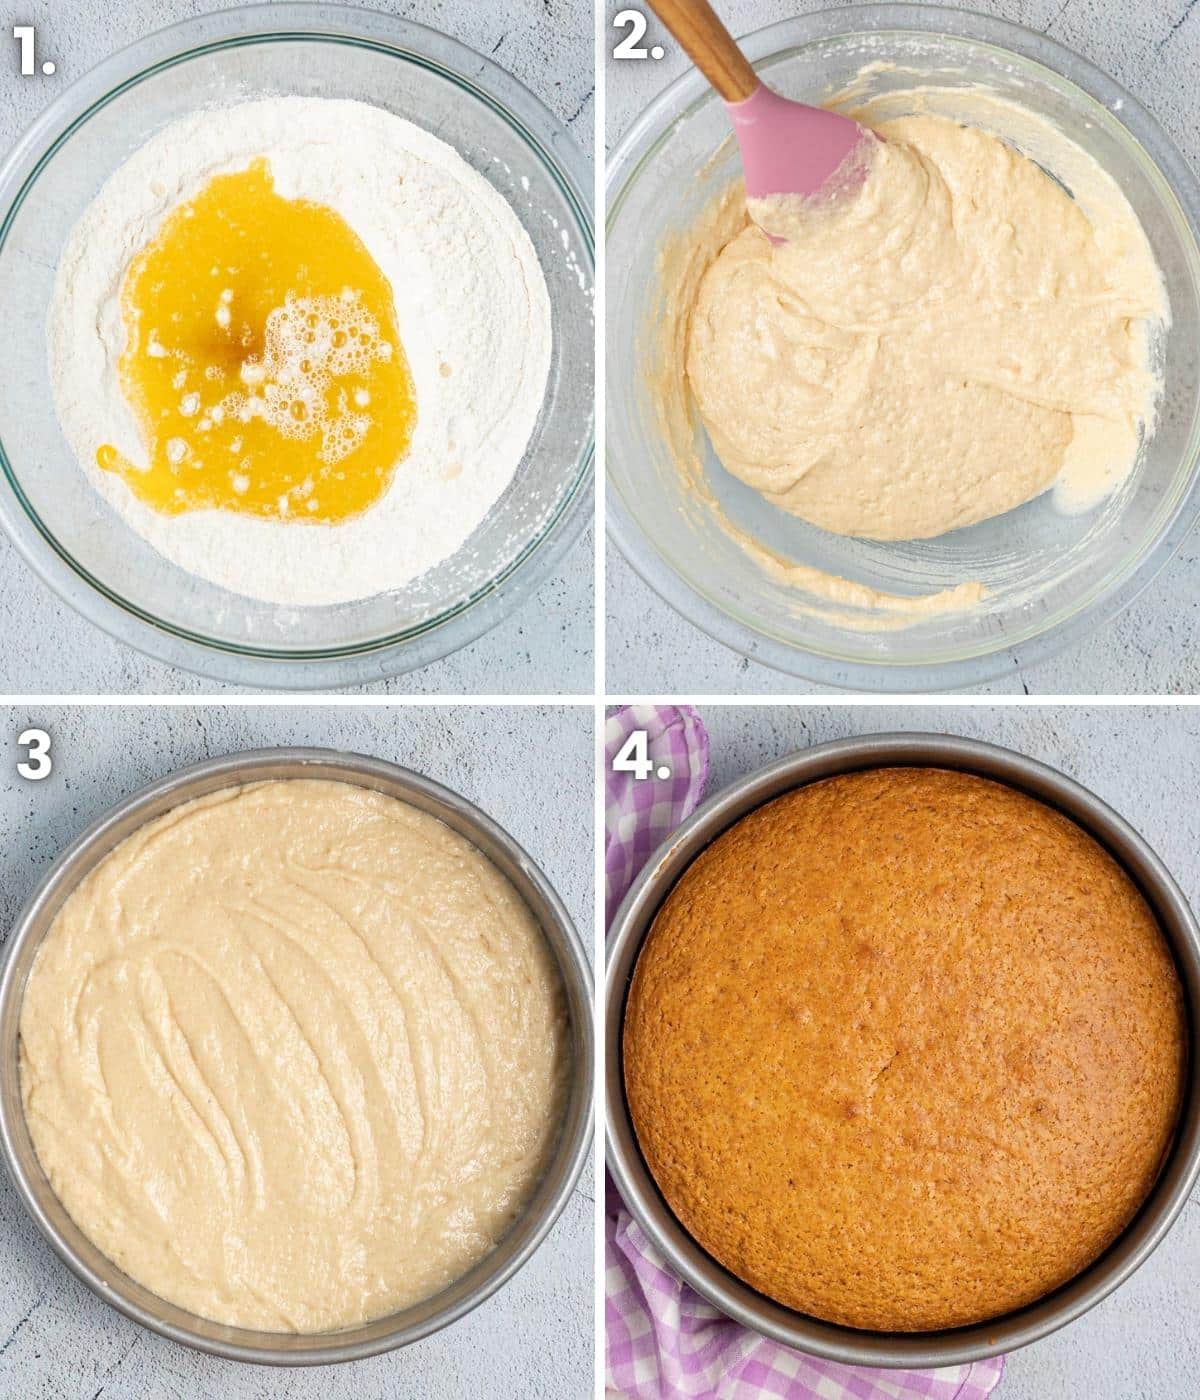 how to make the cake layer step by step as per the written instructions